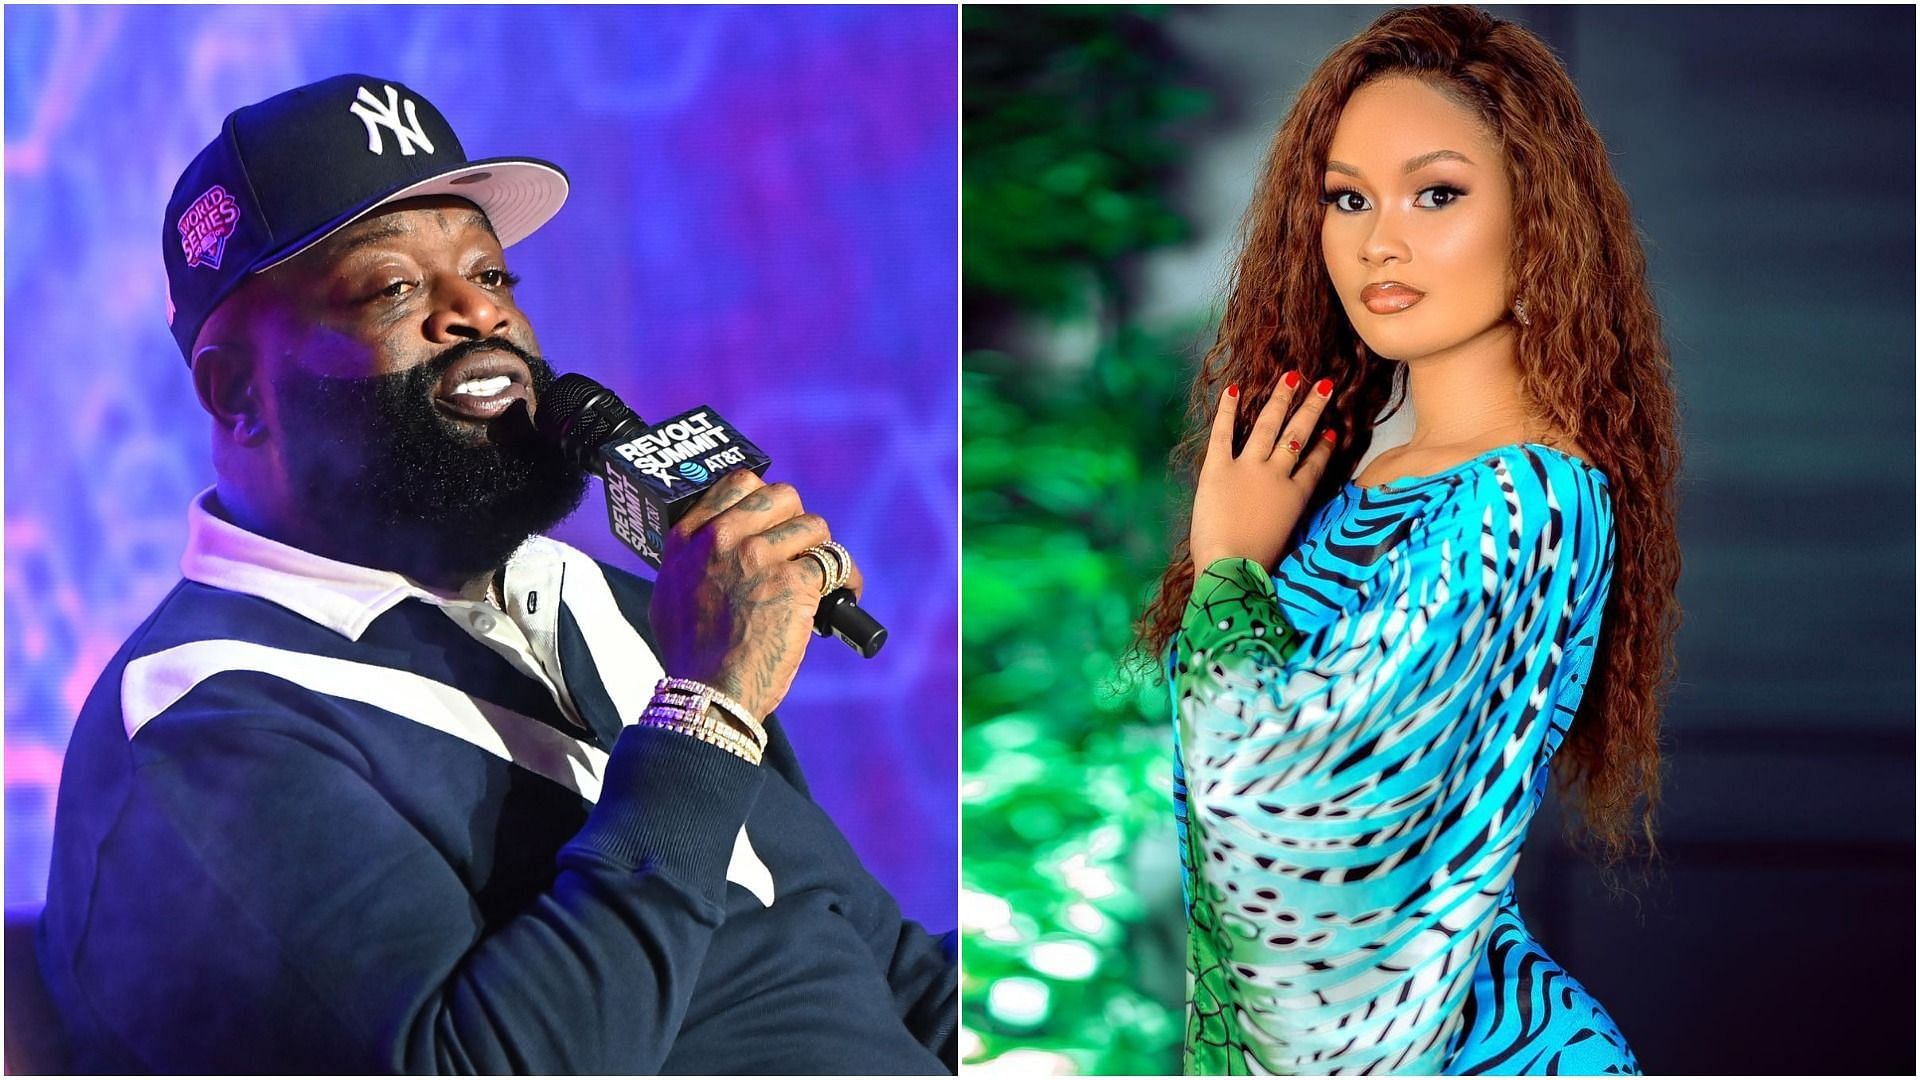 Rick Ross and Hamisa Mobetto were recently seen together in a viral video (Images via Paras Griffin/Getty Images and hamisamobetto/Instagram)